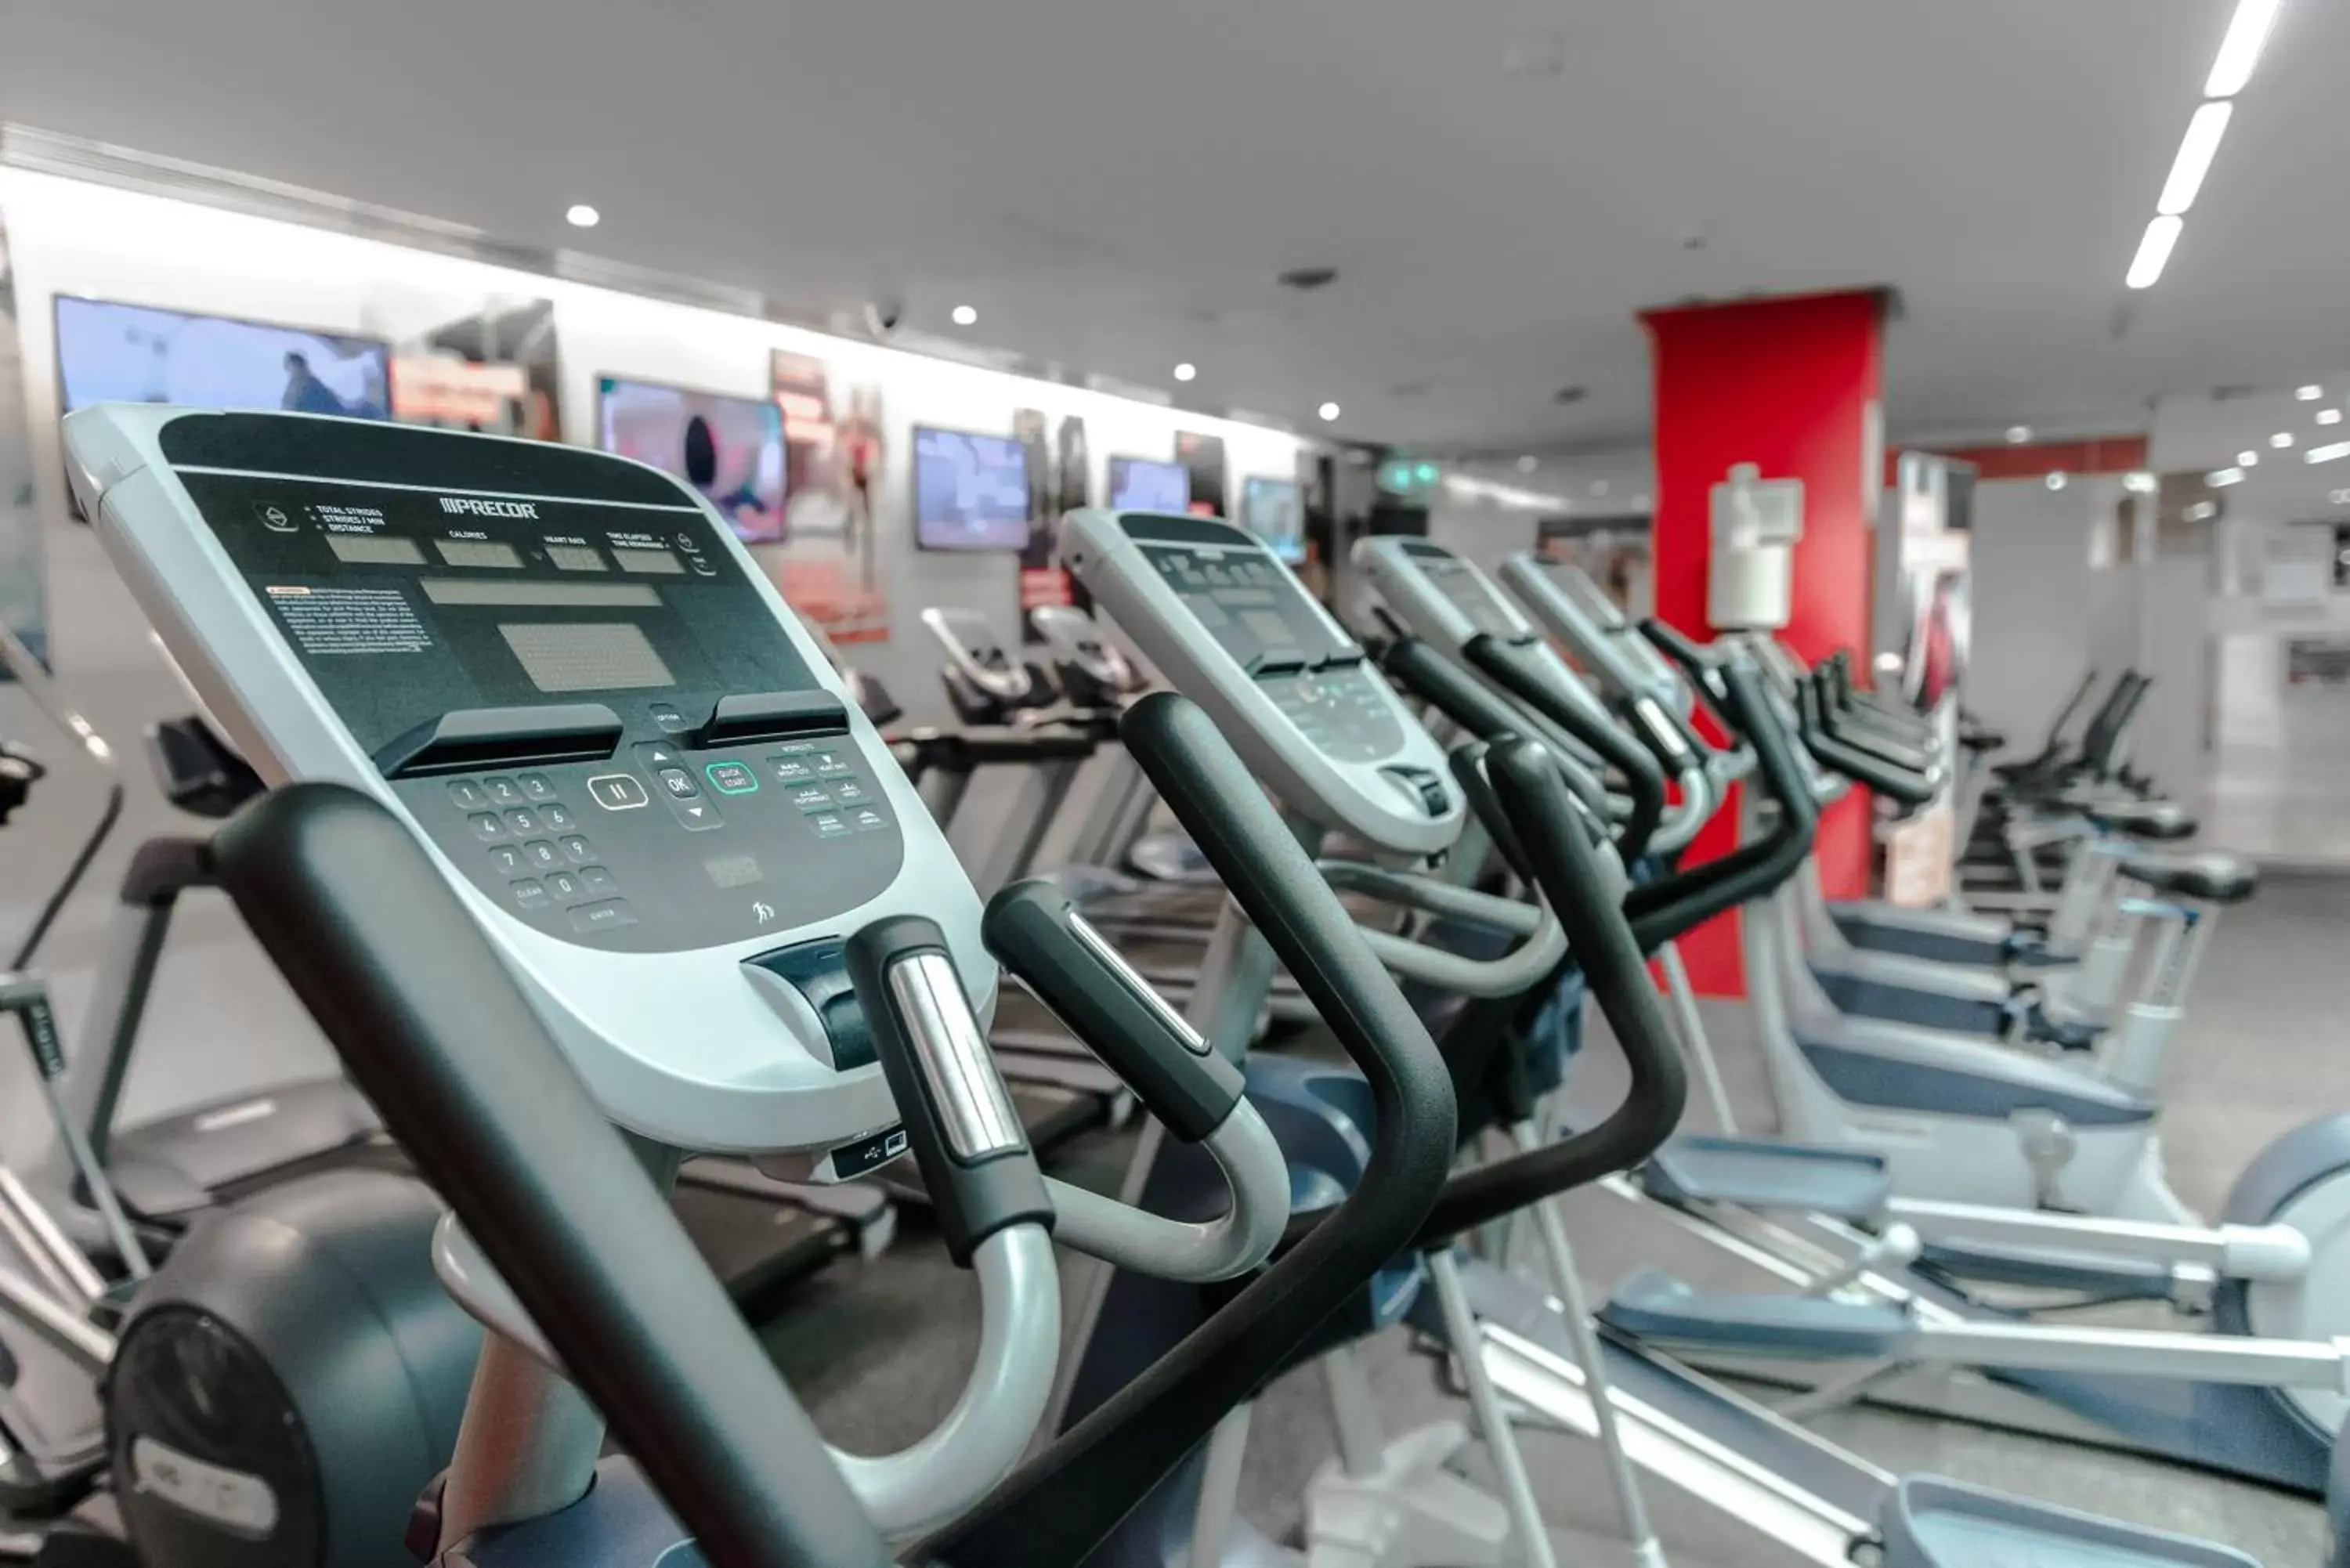 Fitness centre/facilities in Clayton Hotel Cork City